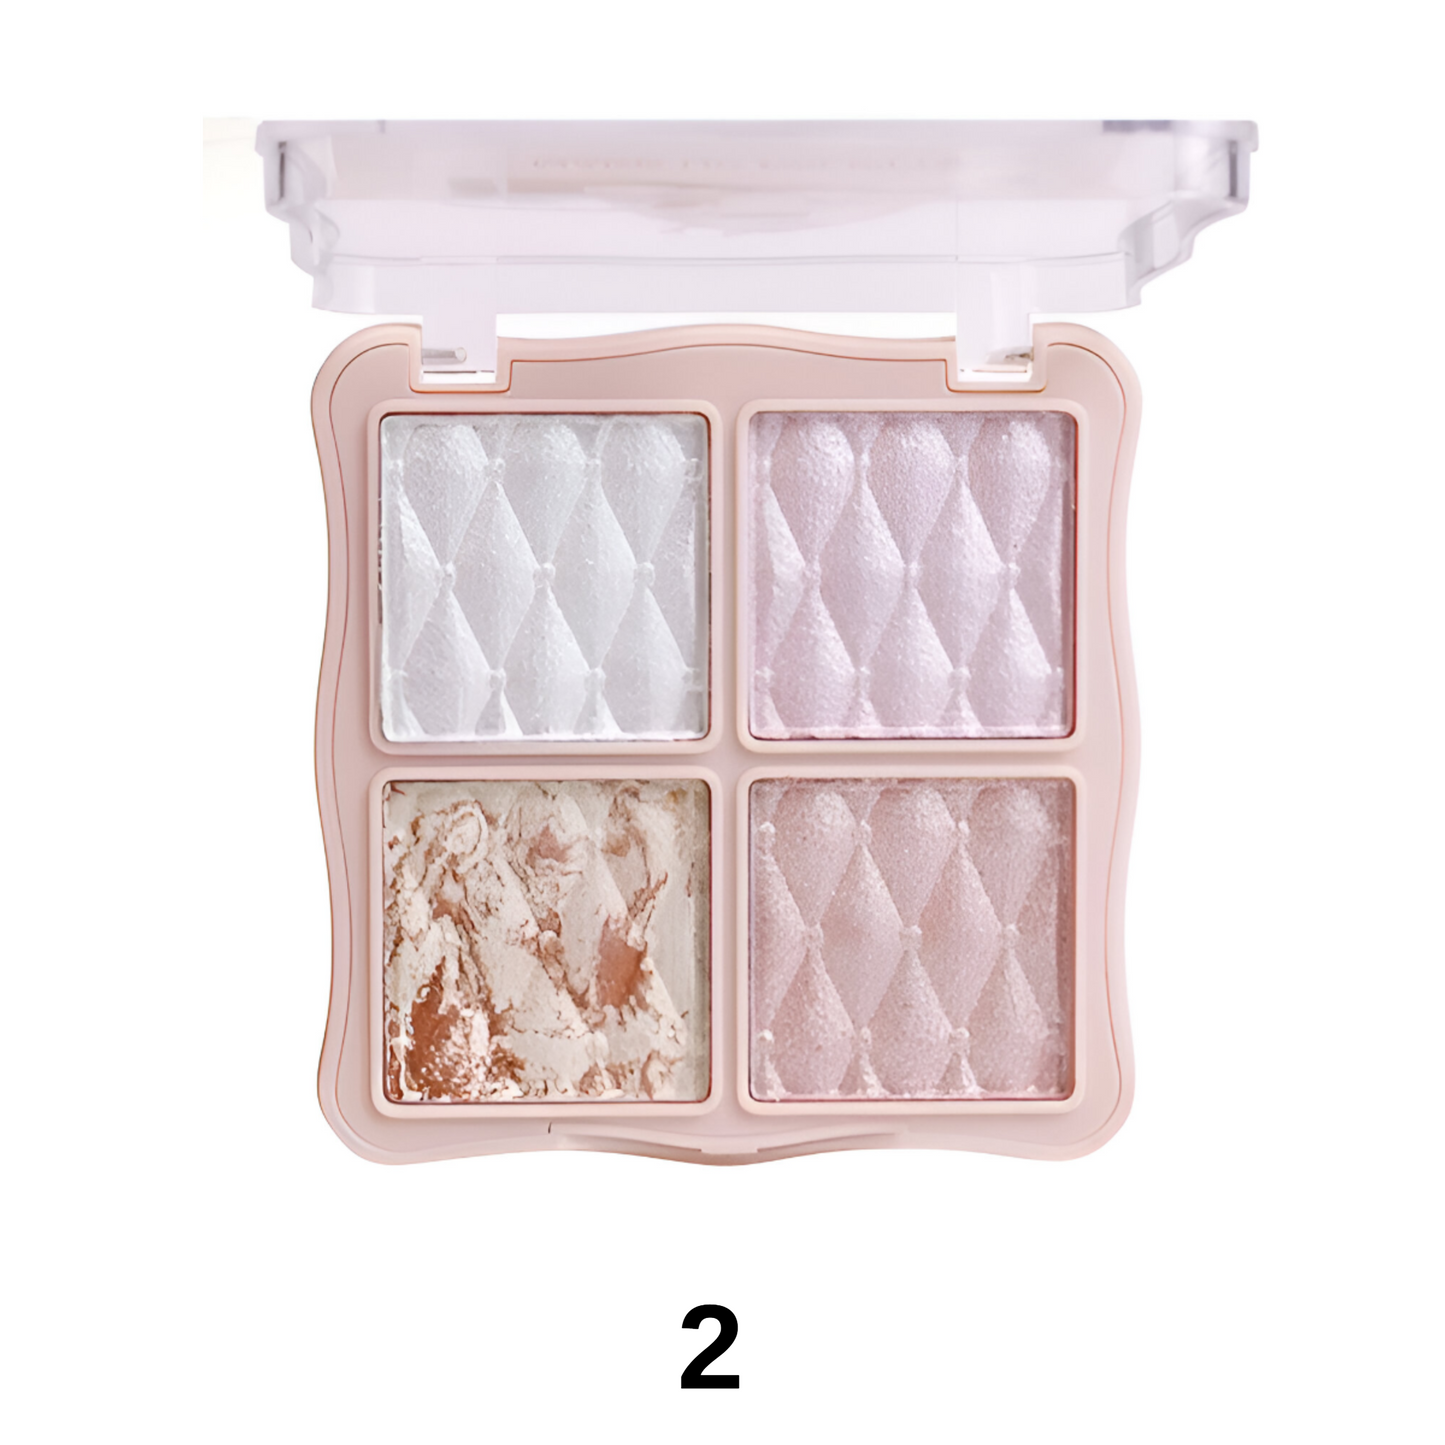 Quetee 4 in 1 baked powder makeup kit